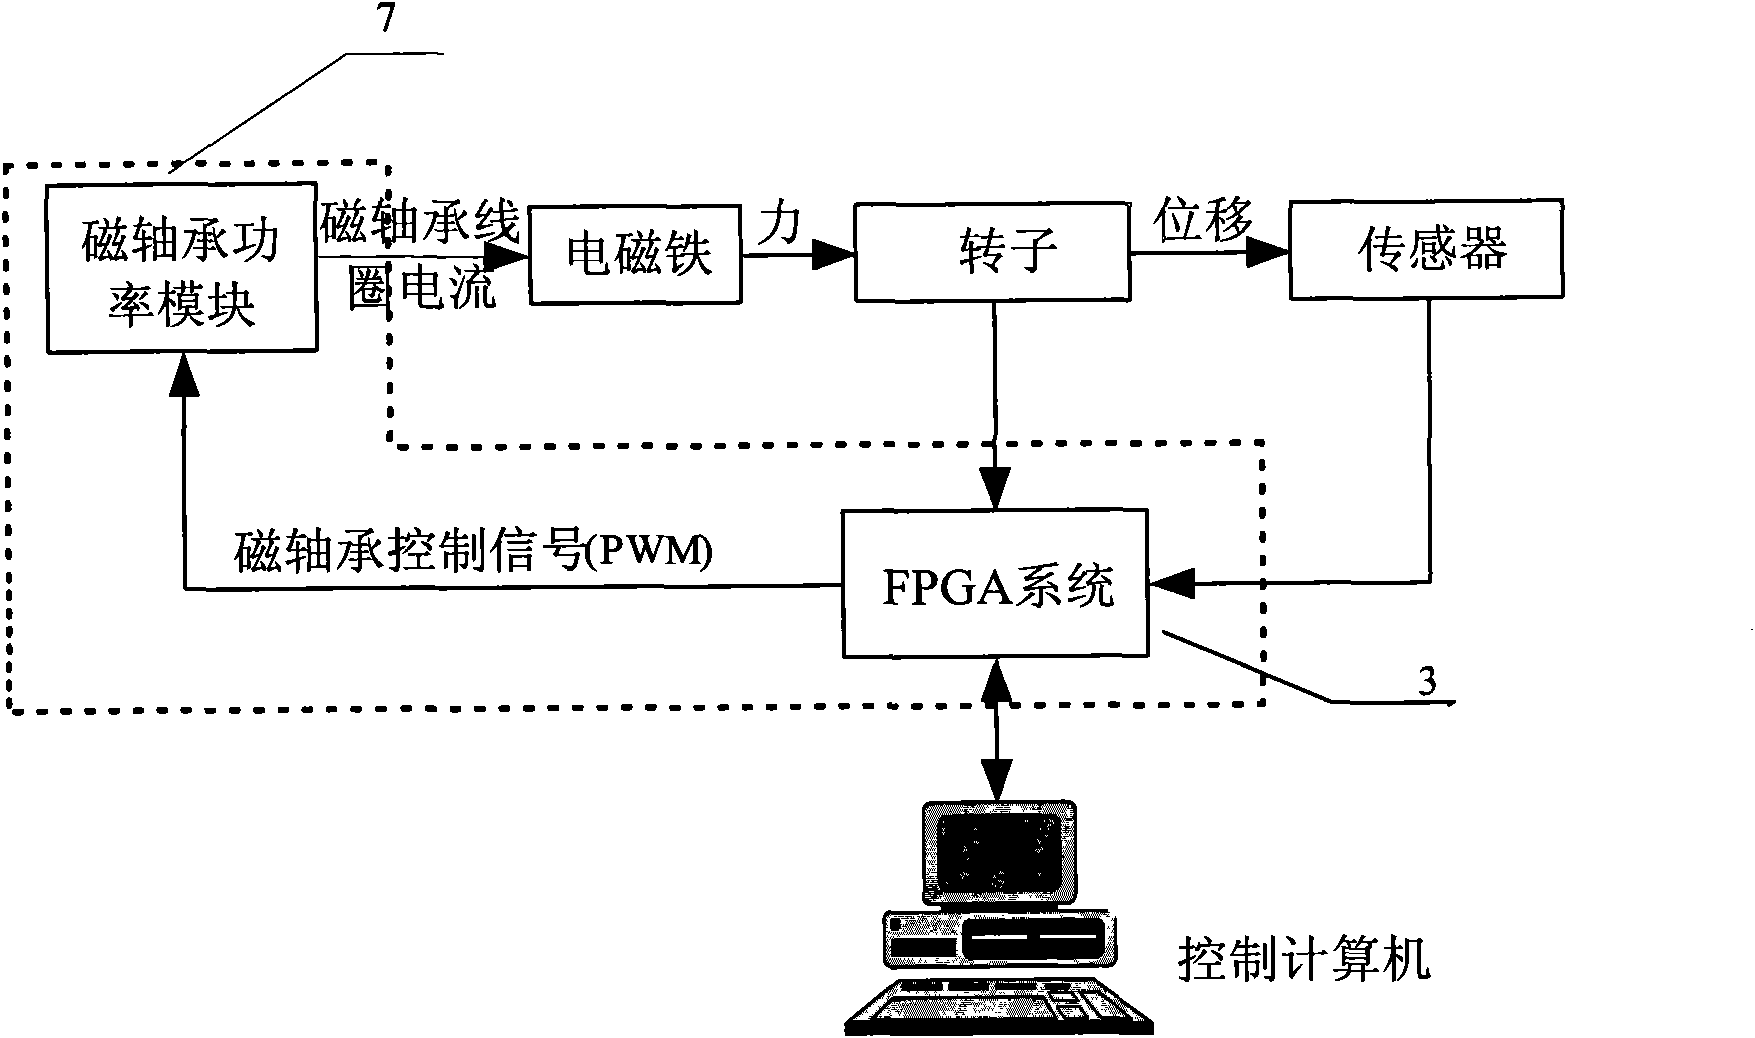 Integrated highly-reliable magnetic suspension energy storage flywheel digital control device